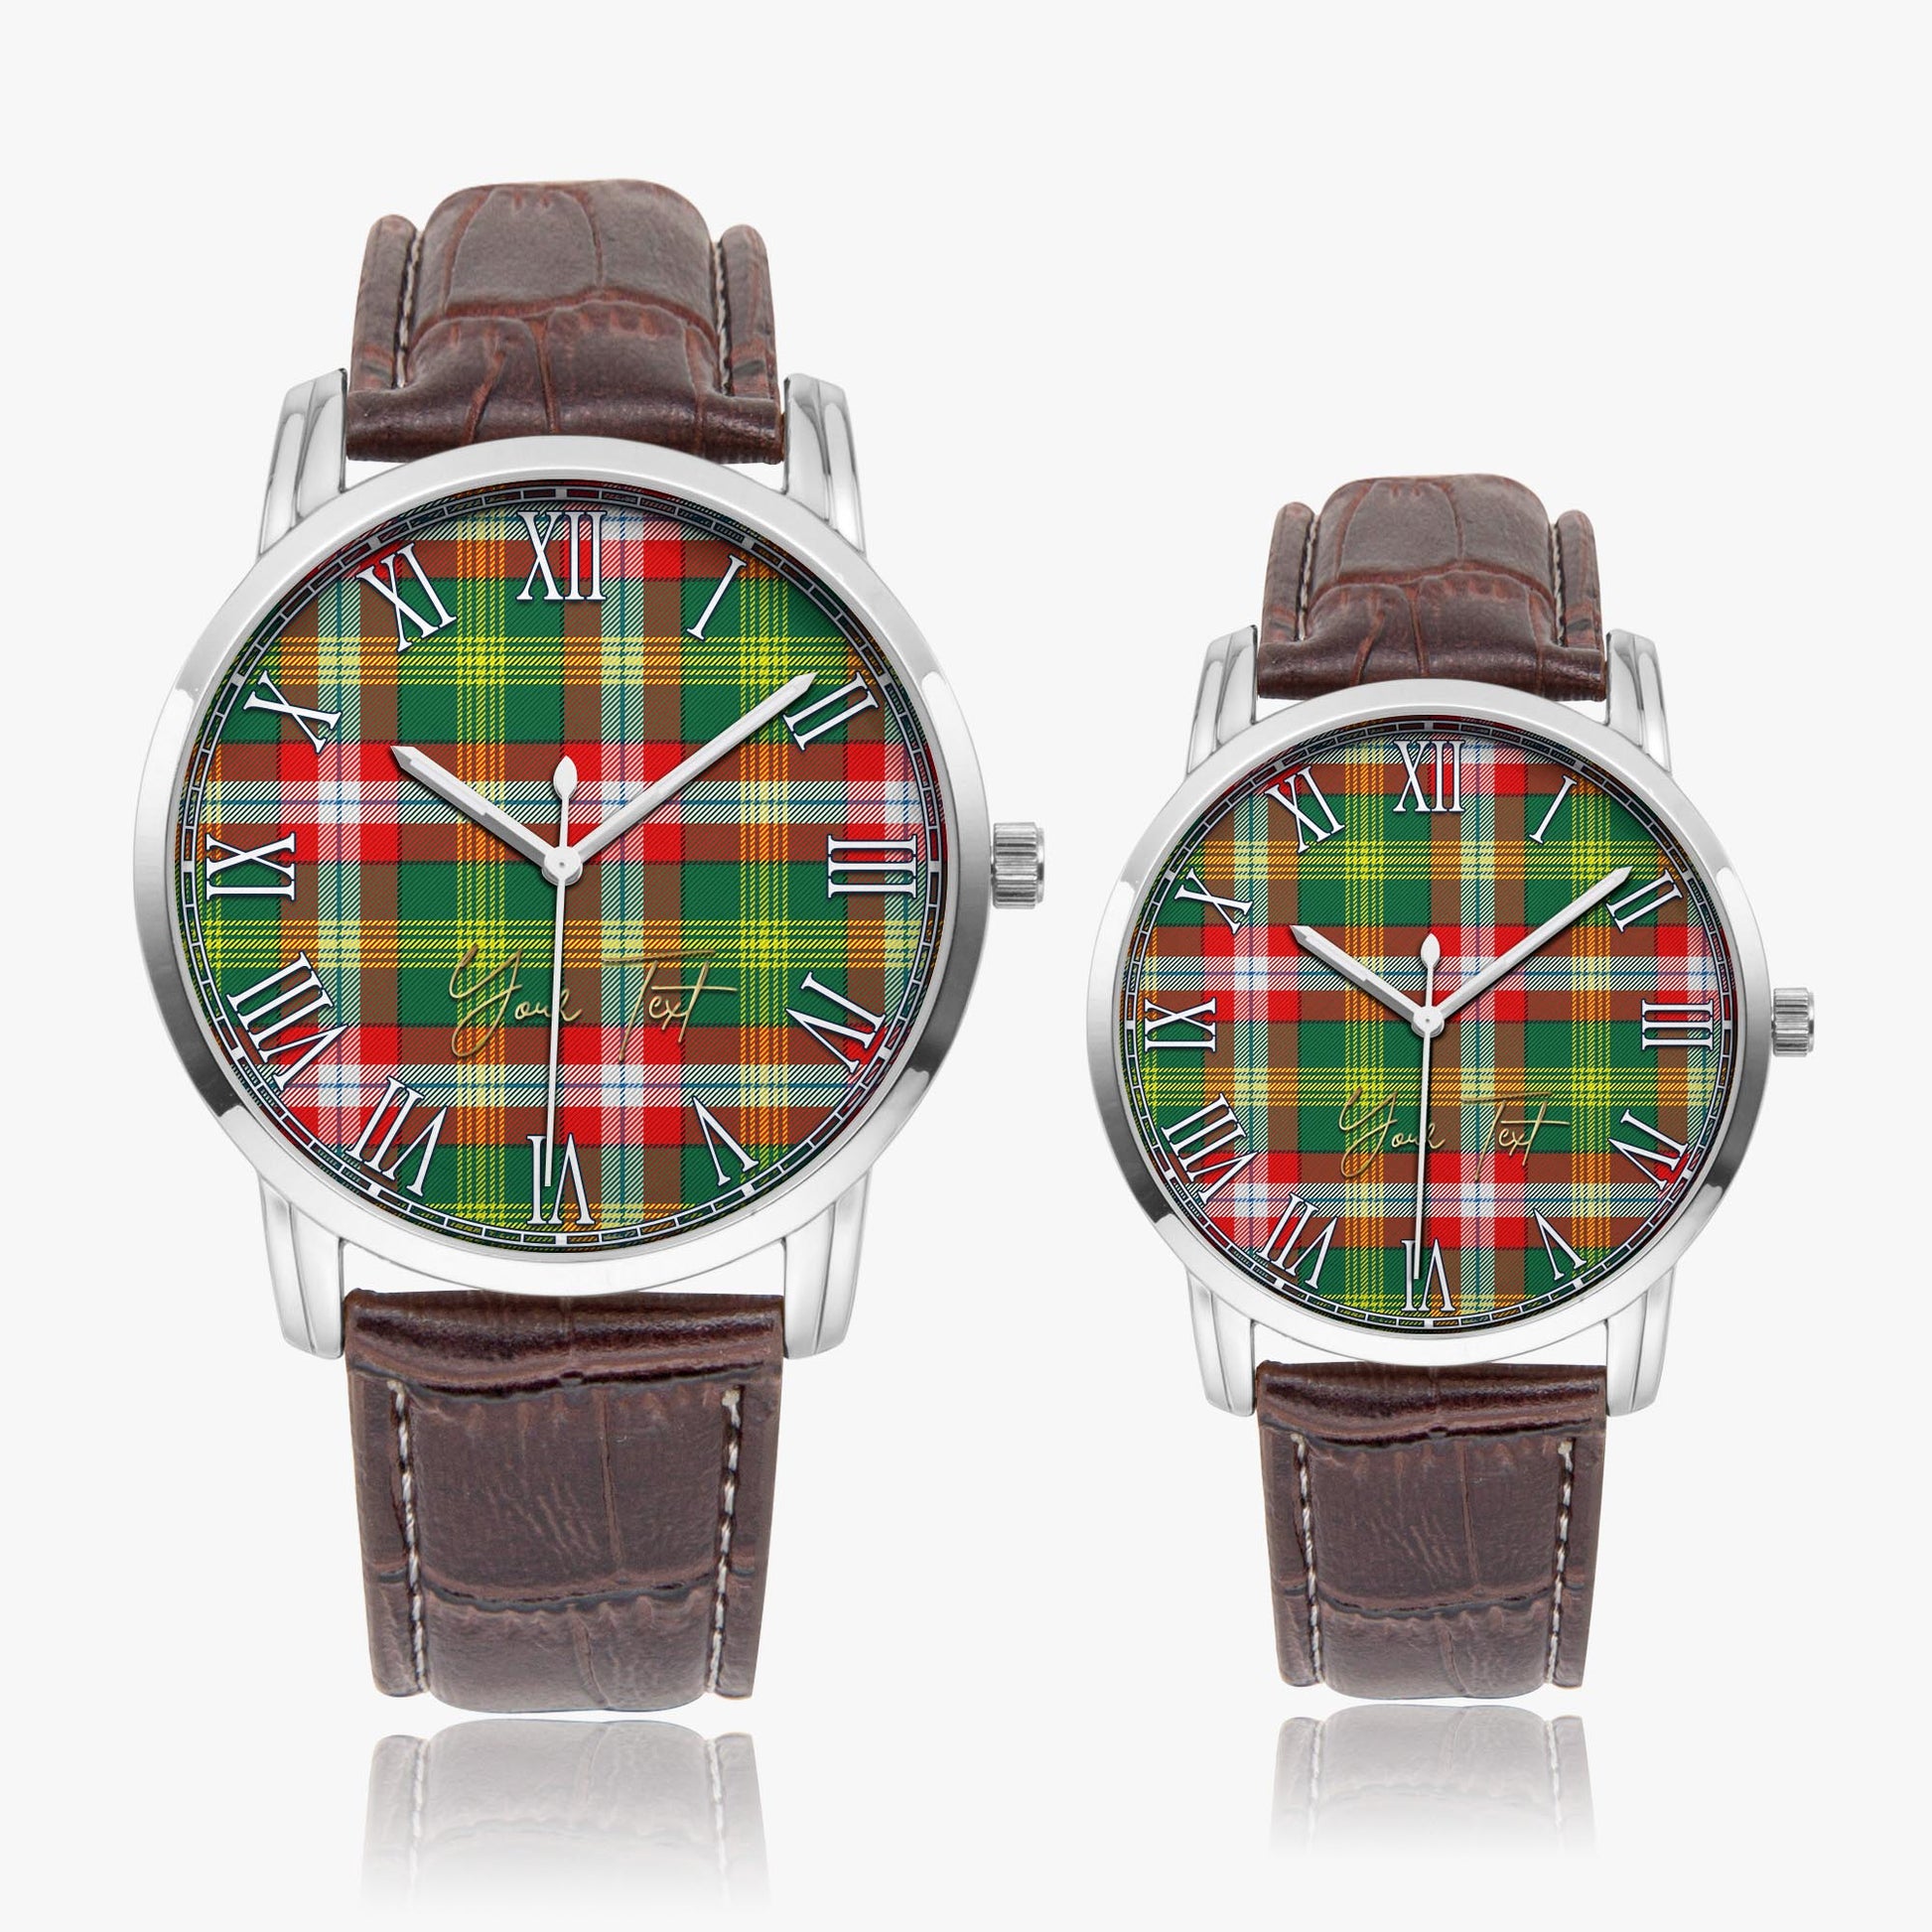 Northwest Territories Canada Tartan Personalized Your Text Leather Trap Quartz Watch Wide Type Silver Case With Brown Leather Strap - Tartanvibesclothing